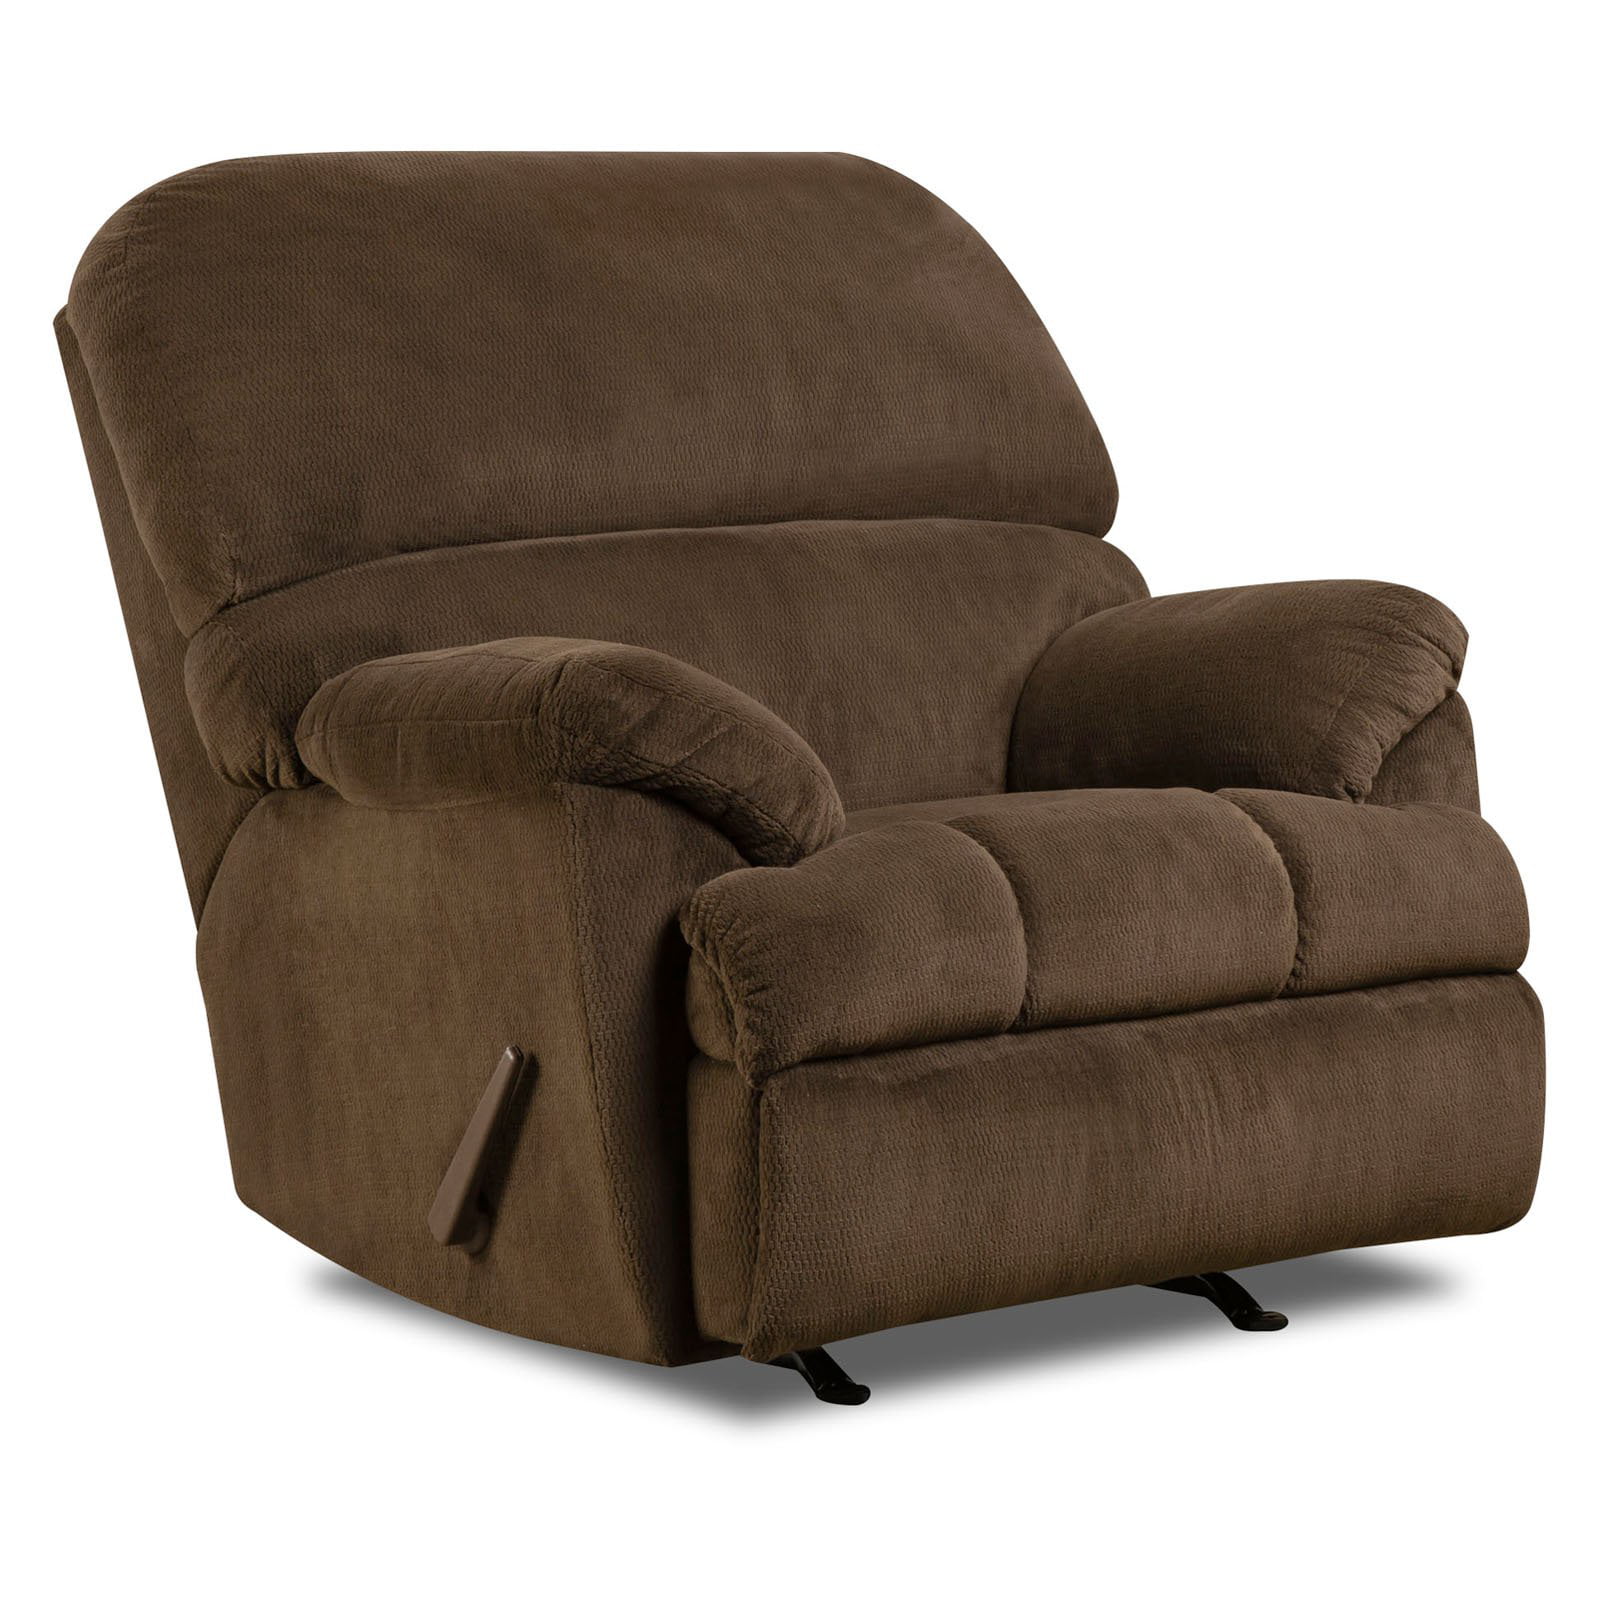 Lane Home Furnishings Dover Power Rocker Recliner Color Coffee